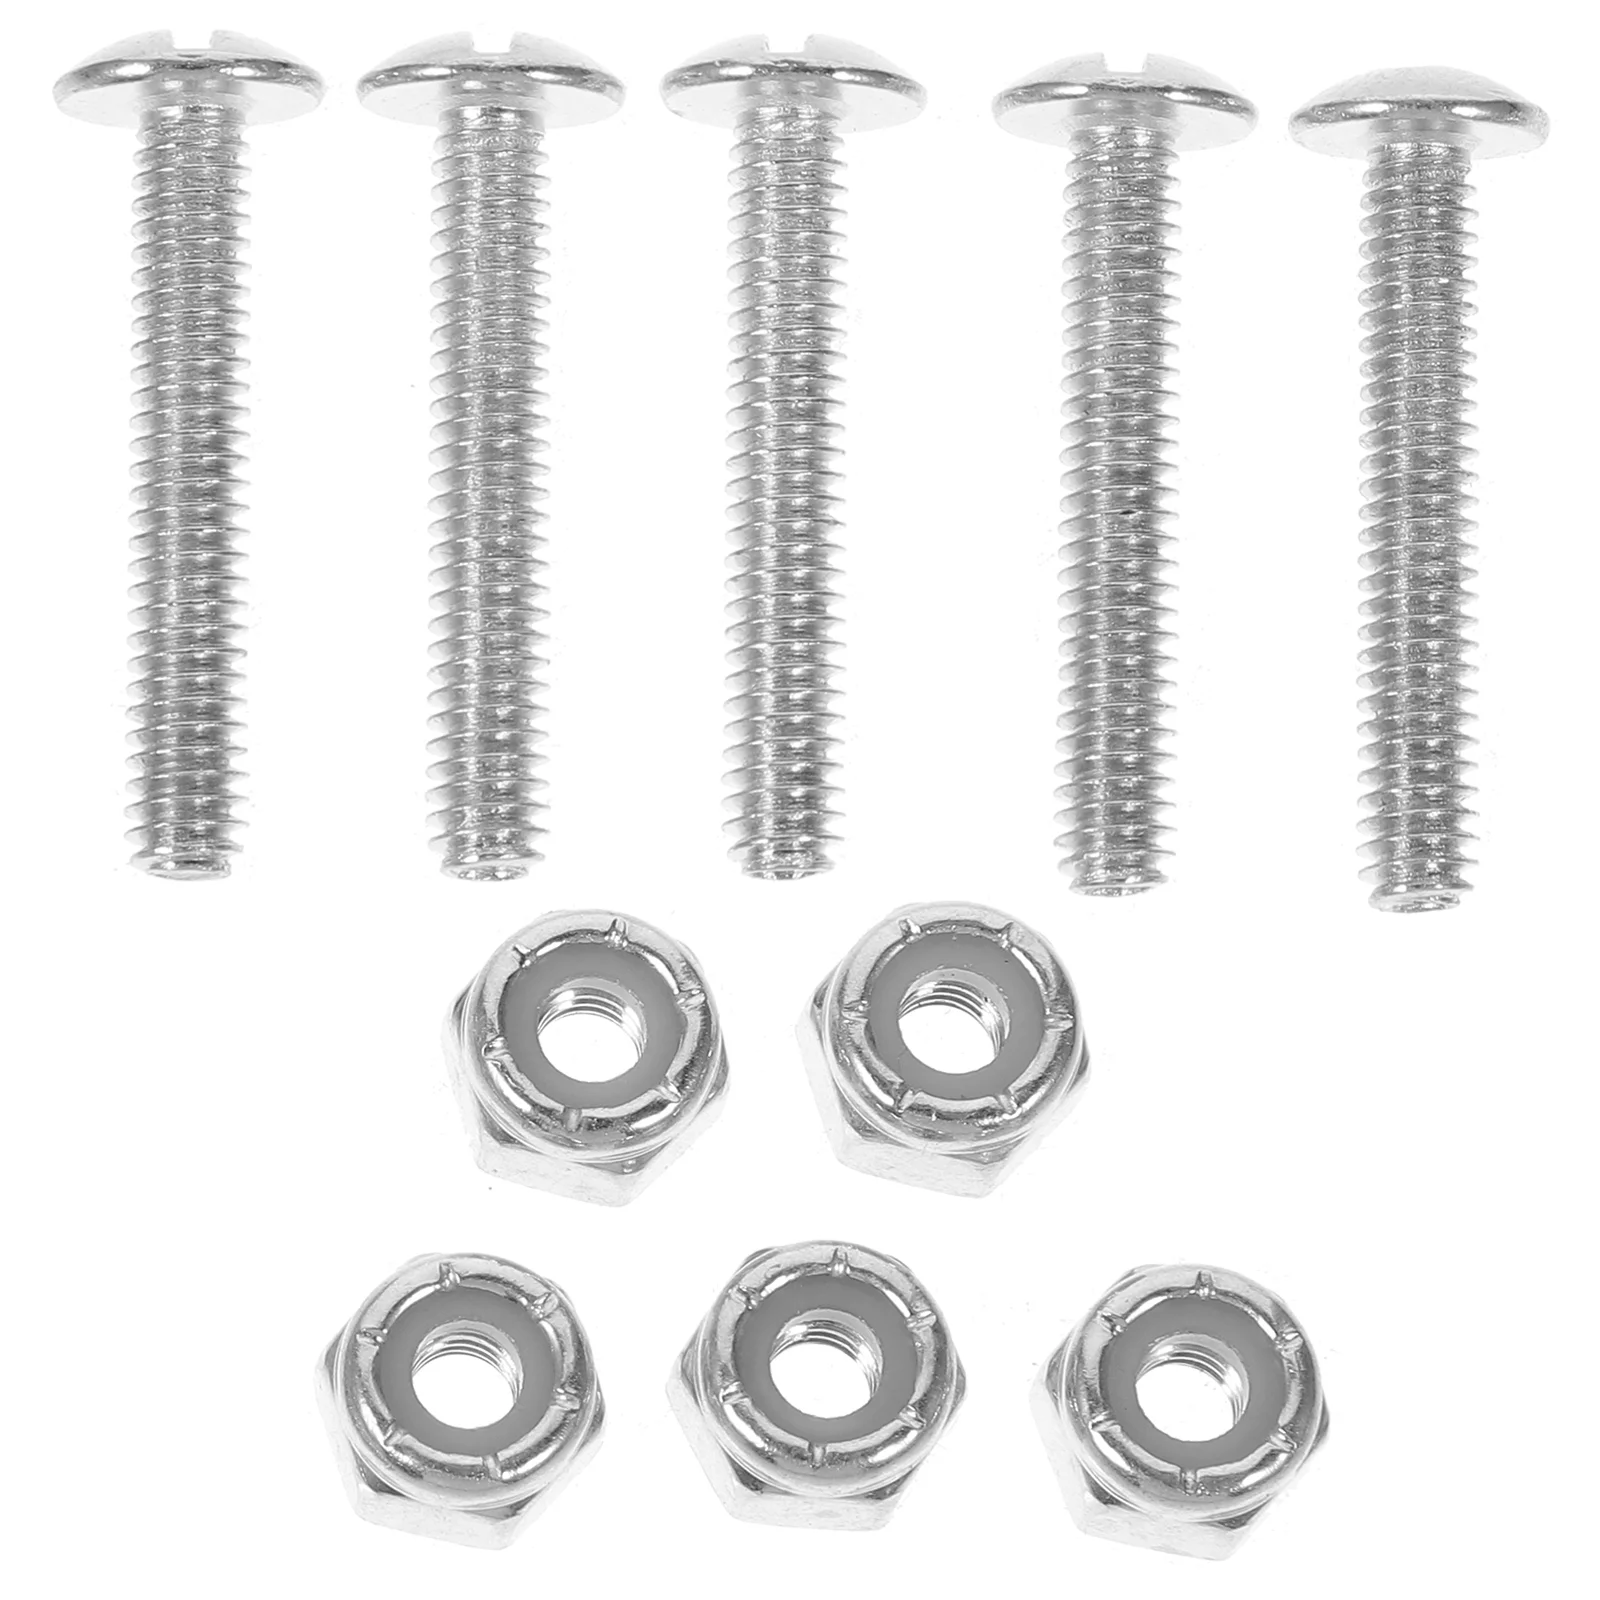 12 Pcs Table Football Screws Foosball Replacement Parts Nut Soccer Hardware Machine Nuts Galvanized Iron Accessories